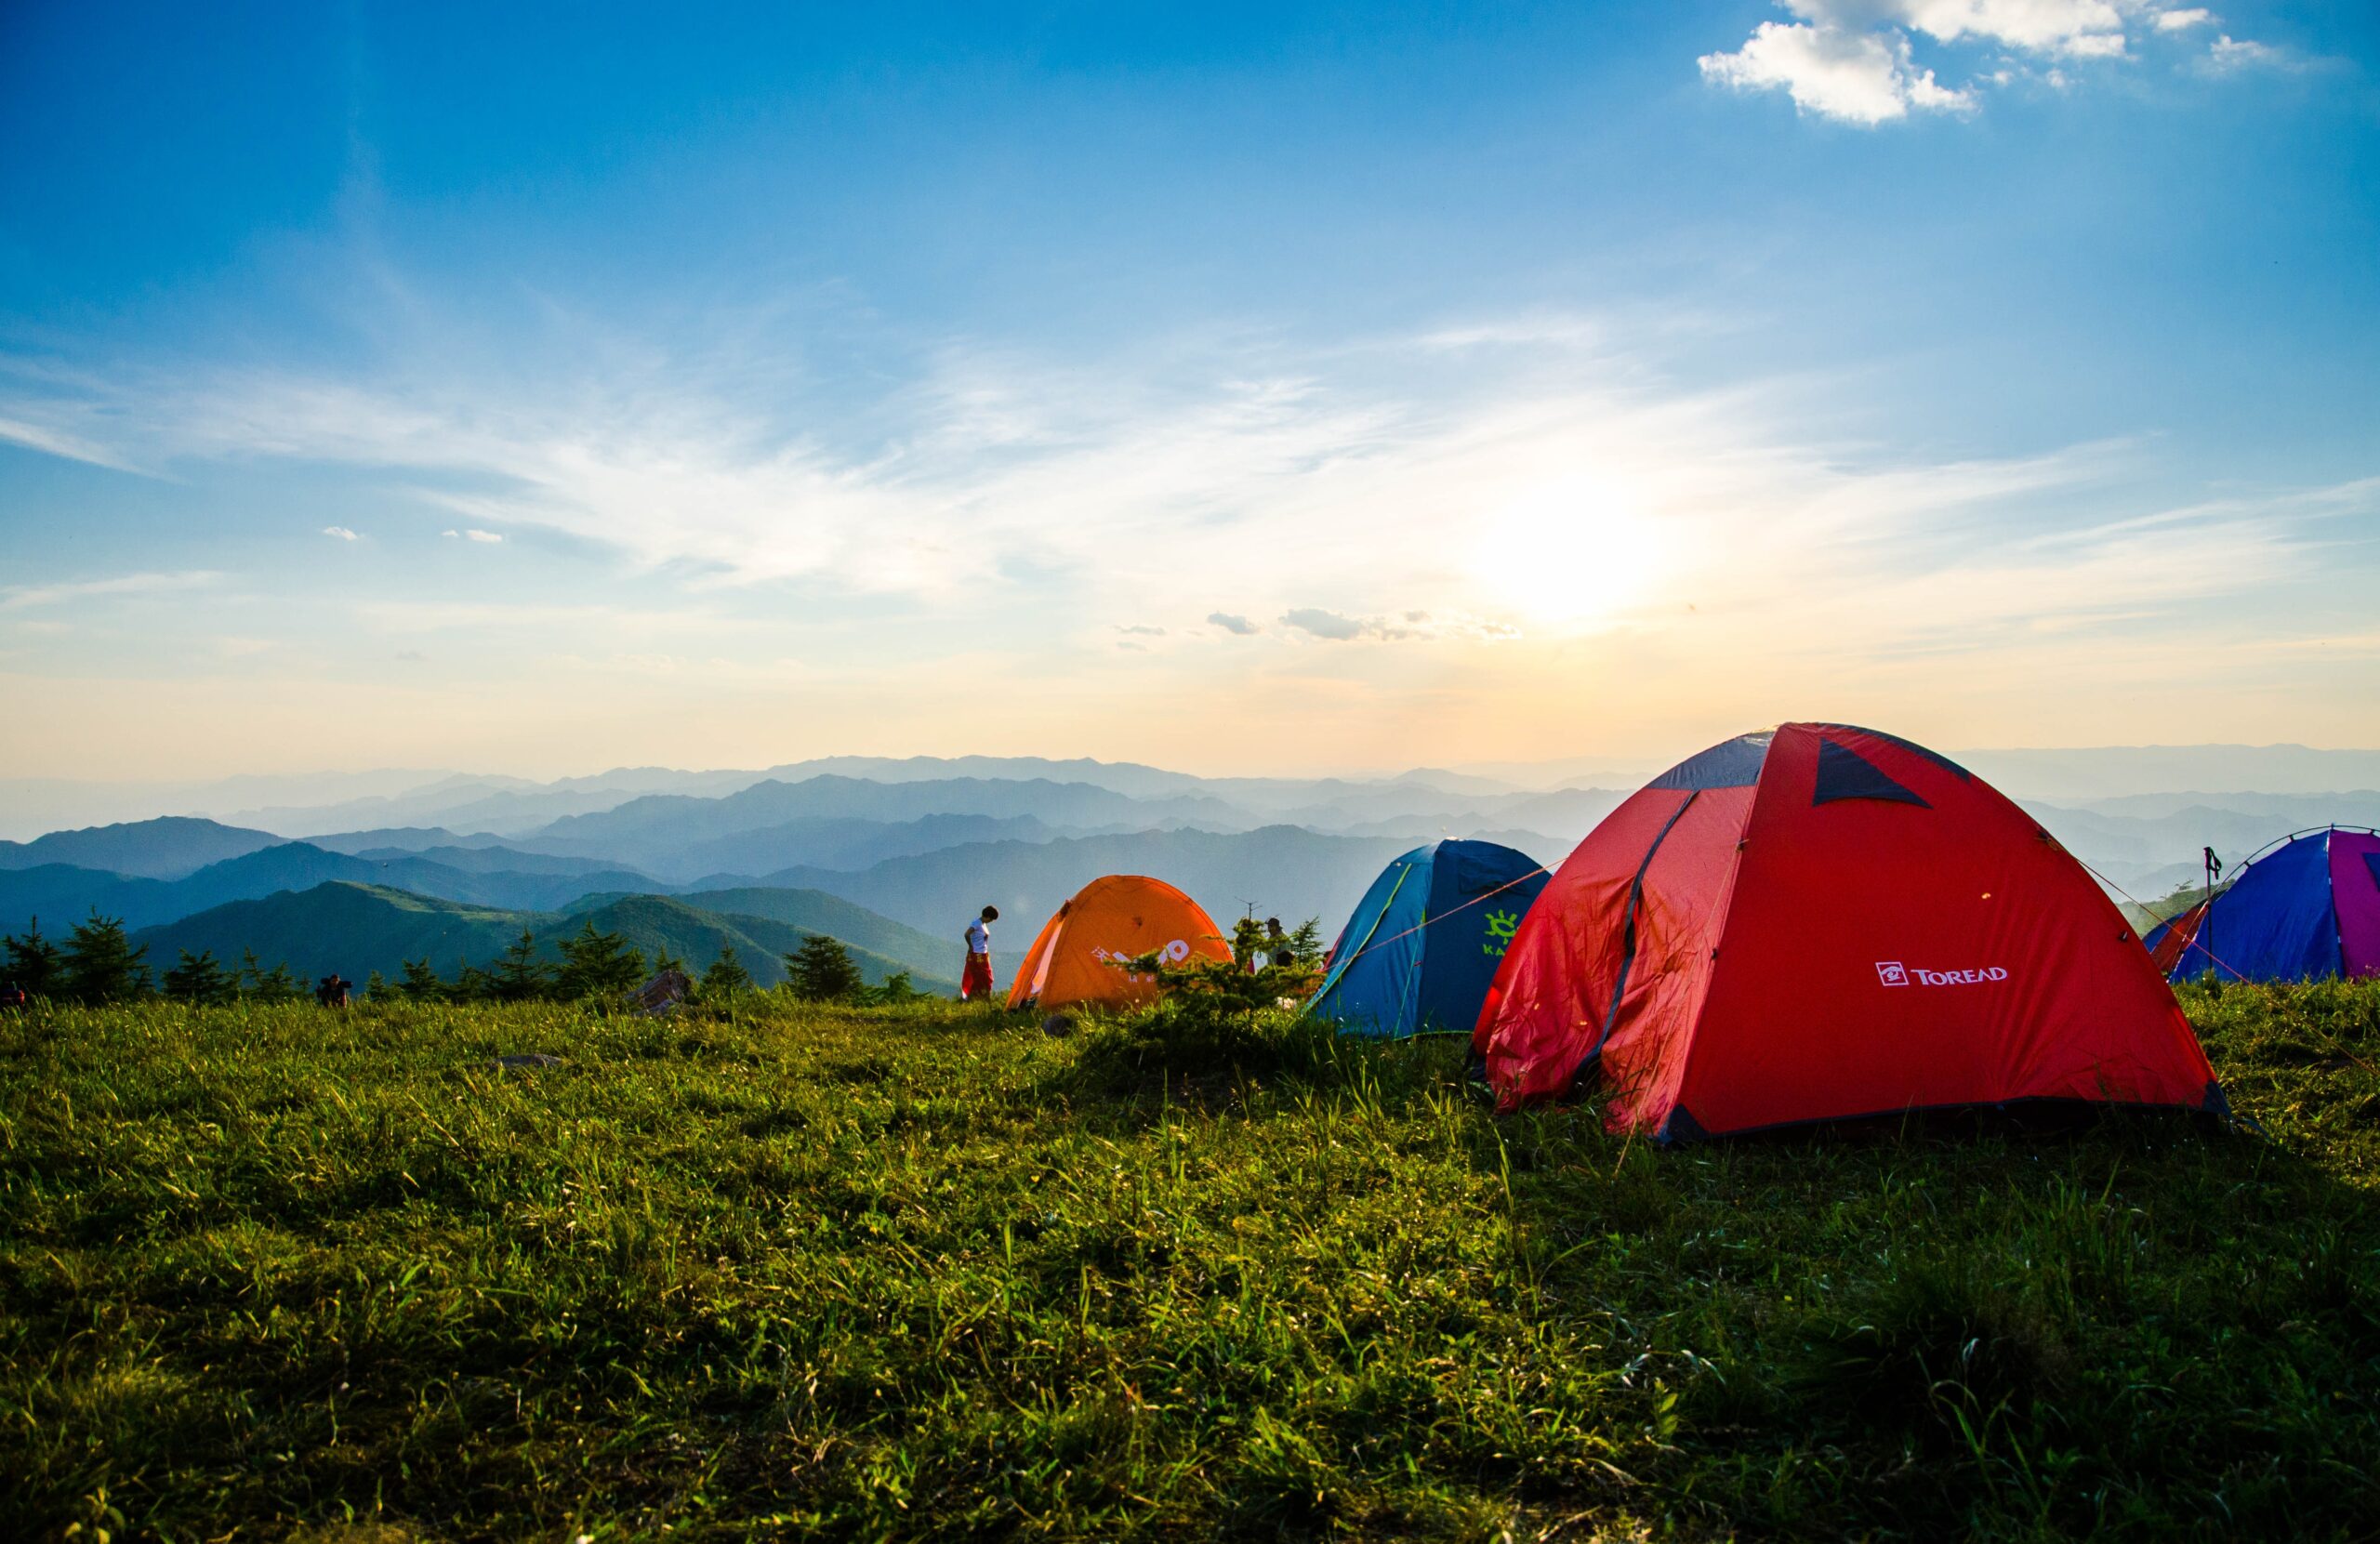 The Beginner’s Guide to Using Camping Solar Panels on Your Next Trip